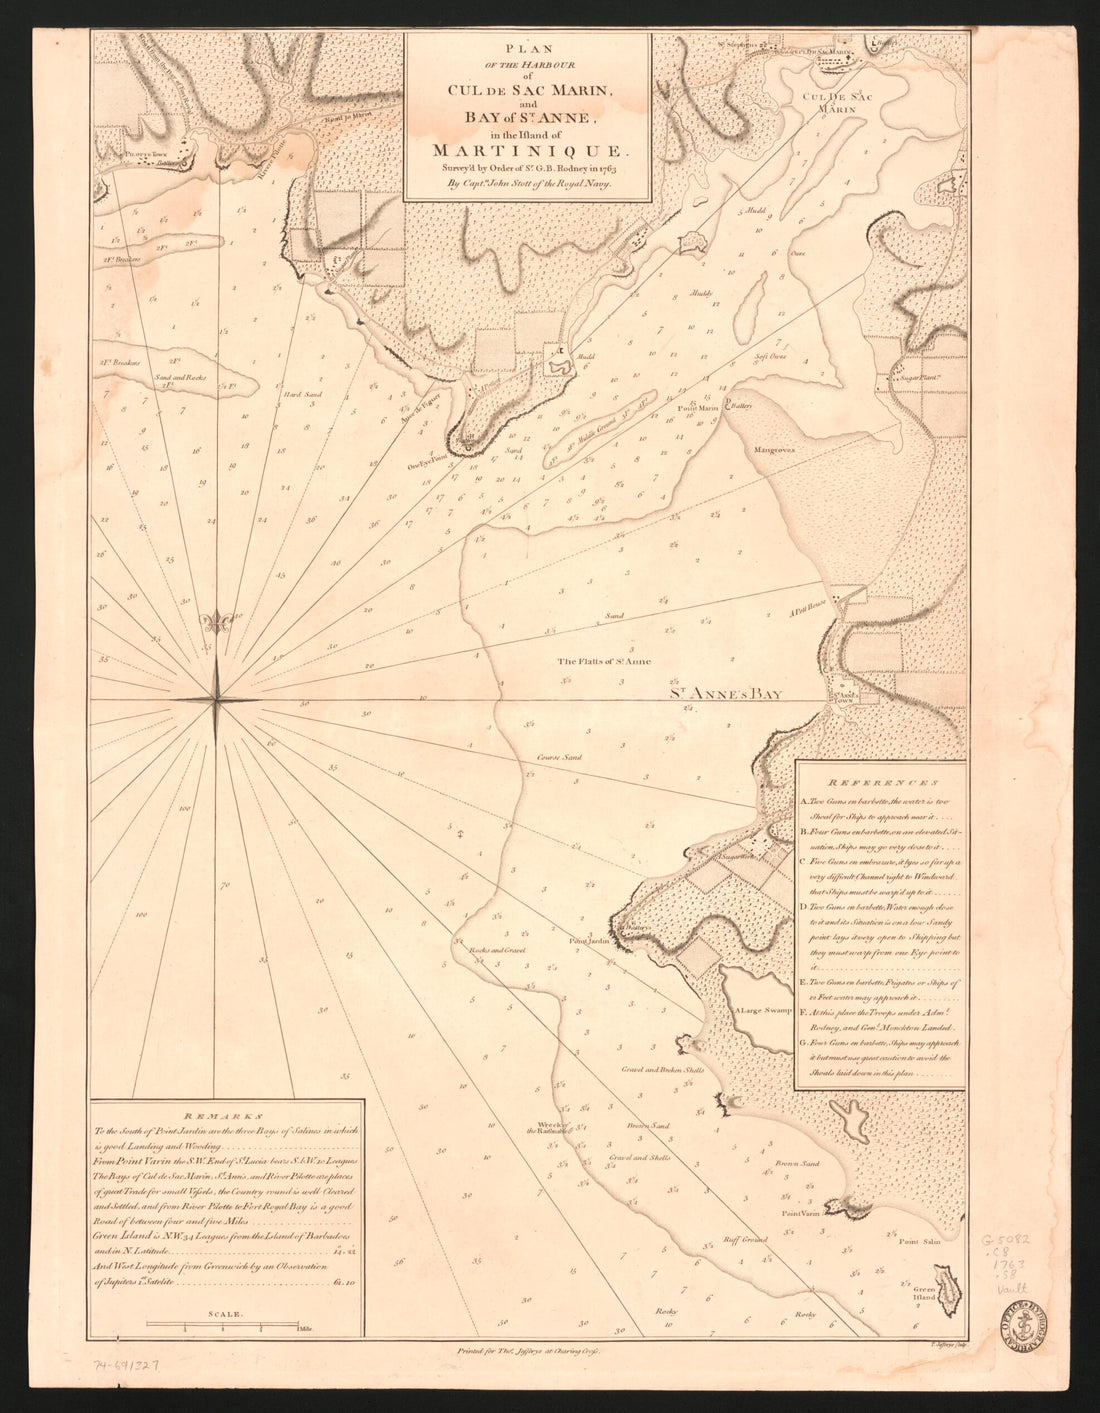 This old map of Plan of the Harbour of Cul De Sac Marin, and Bay of St. Anne, In the Island of Martinique from 1763 was created by Thomas Jefferys, George Brydges Rodney Rodney, John Stott in 1763